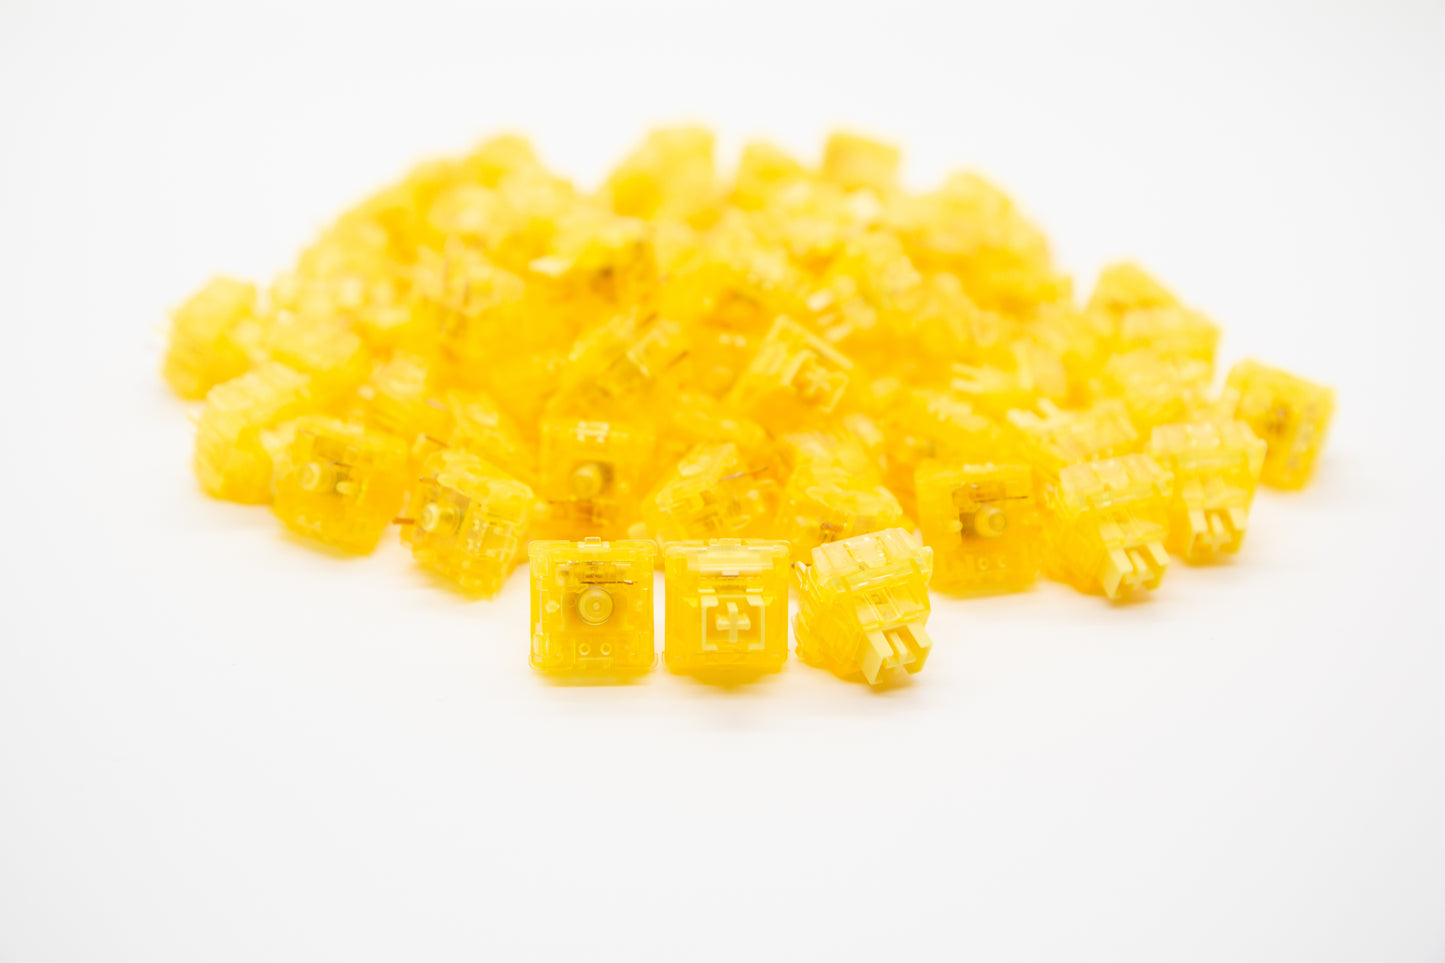 Close-up shot of a pile of Gateron Yellow Ink V2 mechanical keyboard switches featuring yellow housing and yellow stems